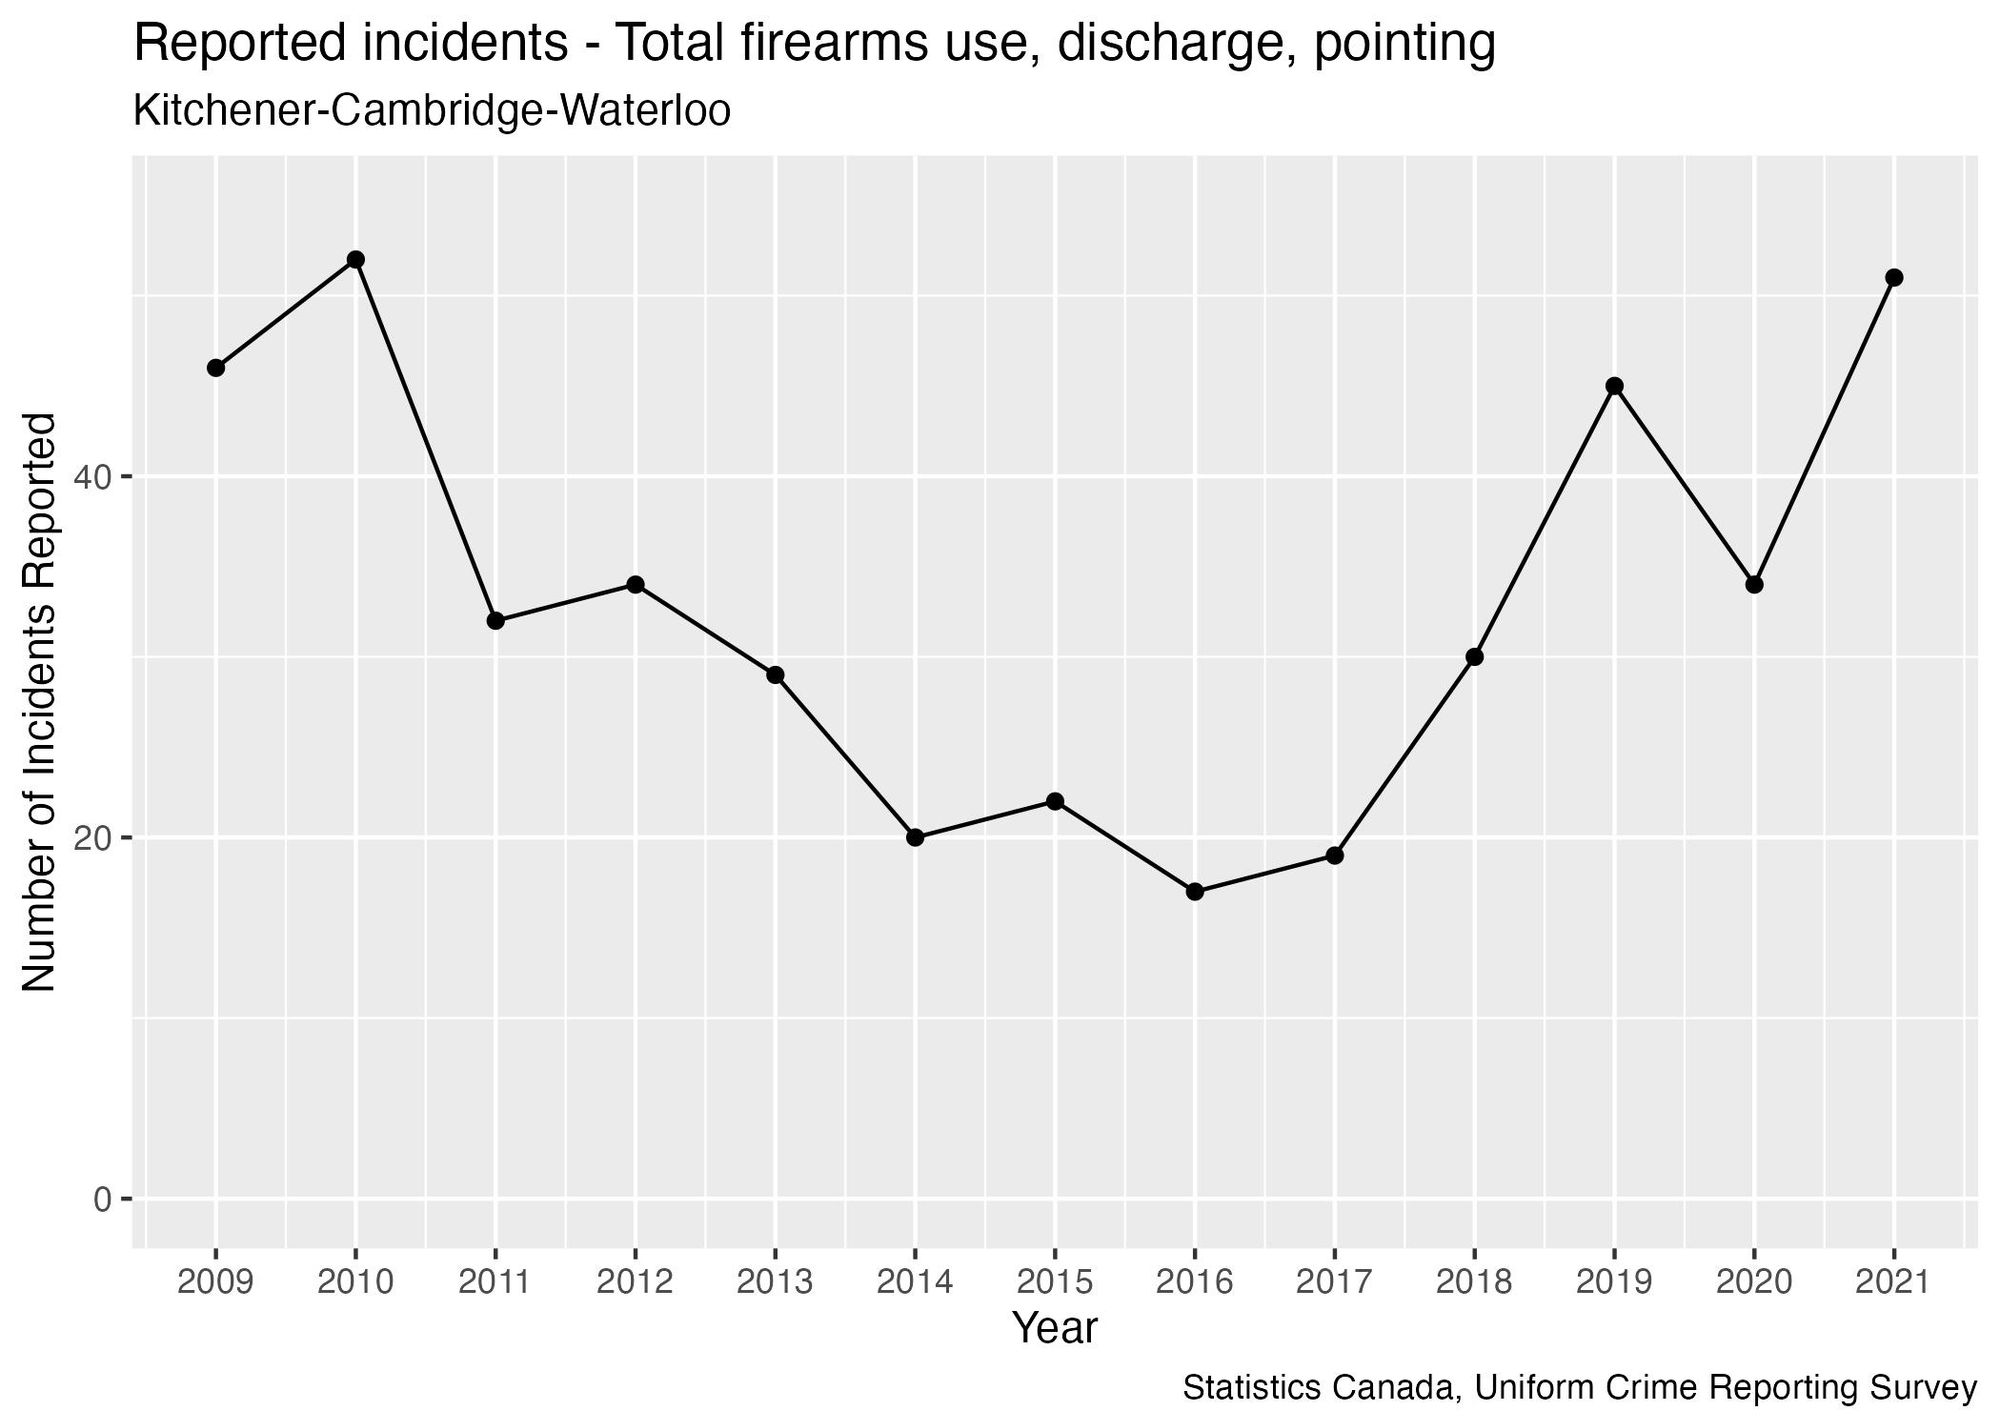 A graph of "Reported incidents -- Total firearms use, discharge, pointing" for Kitchener-Cambridge-Waterloo between 2009 and 2021. The graph frequently switches between going up and down between consecutive years.